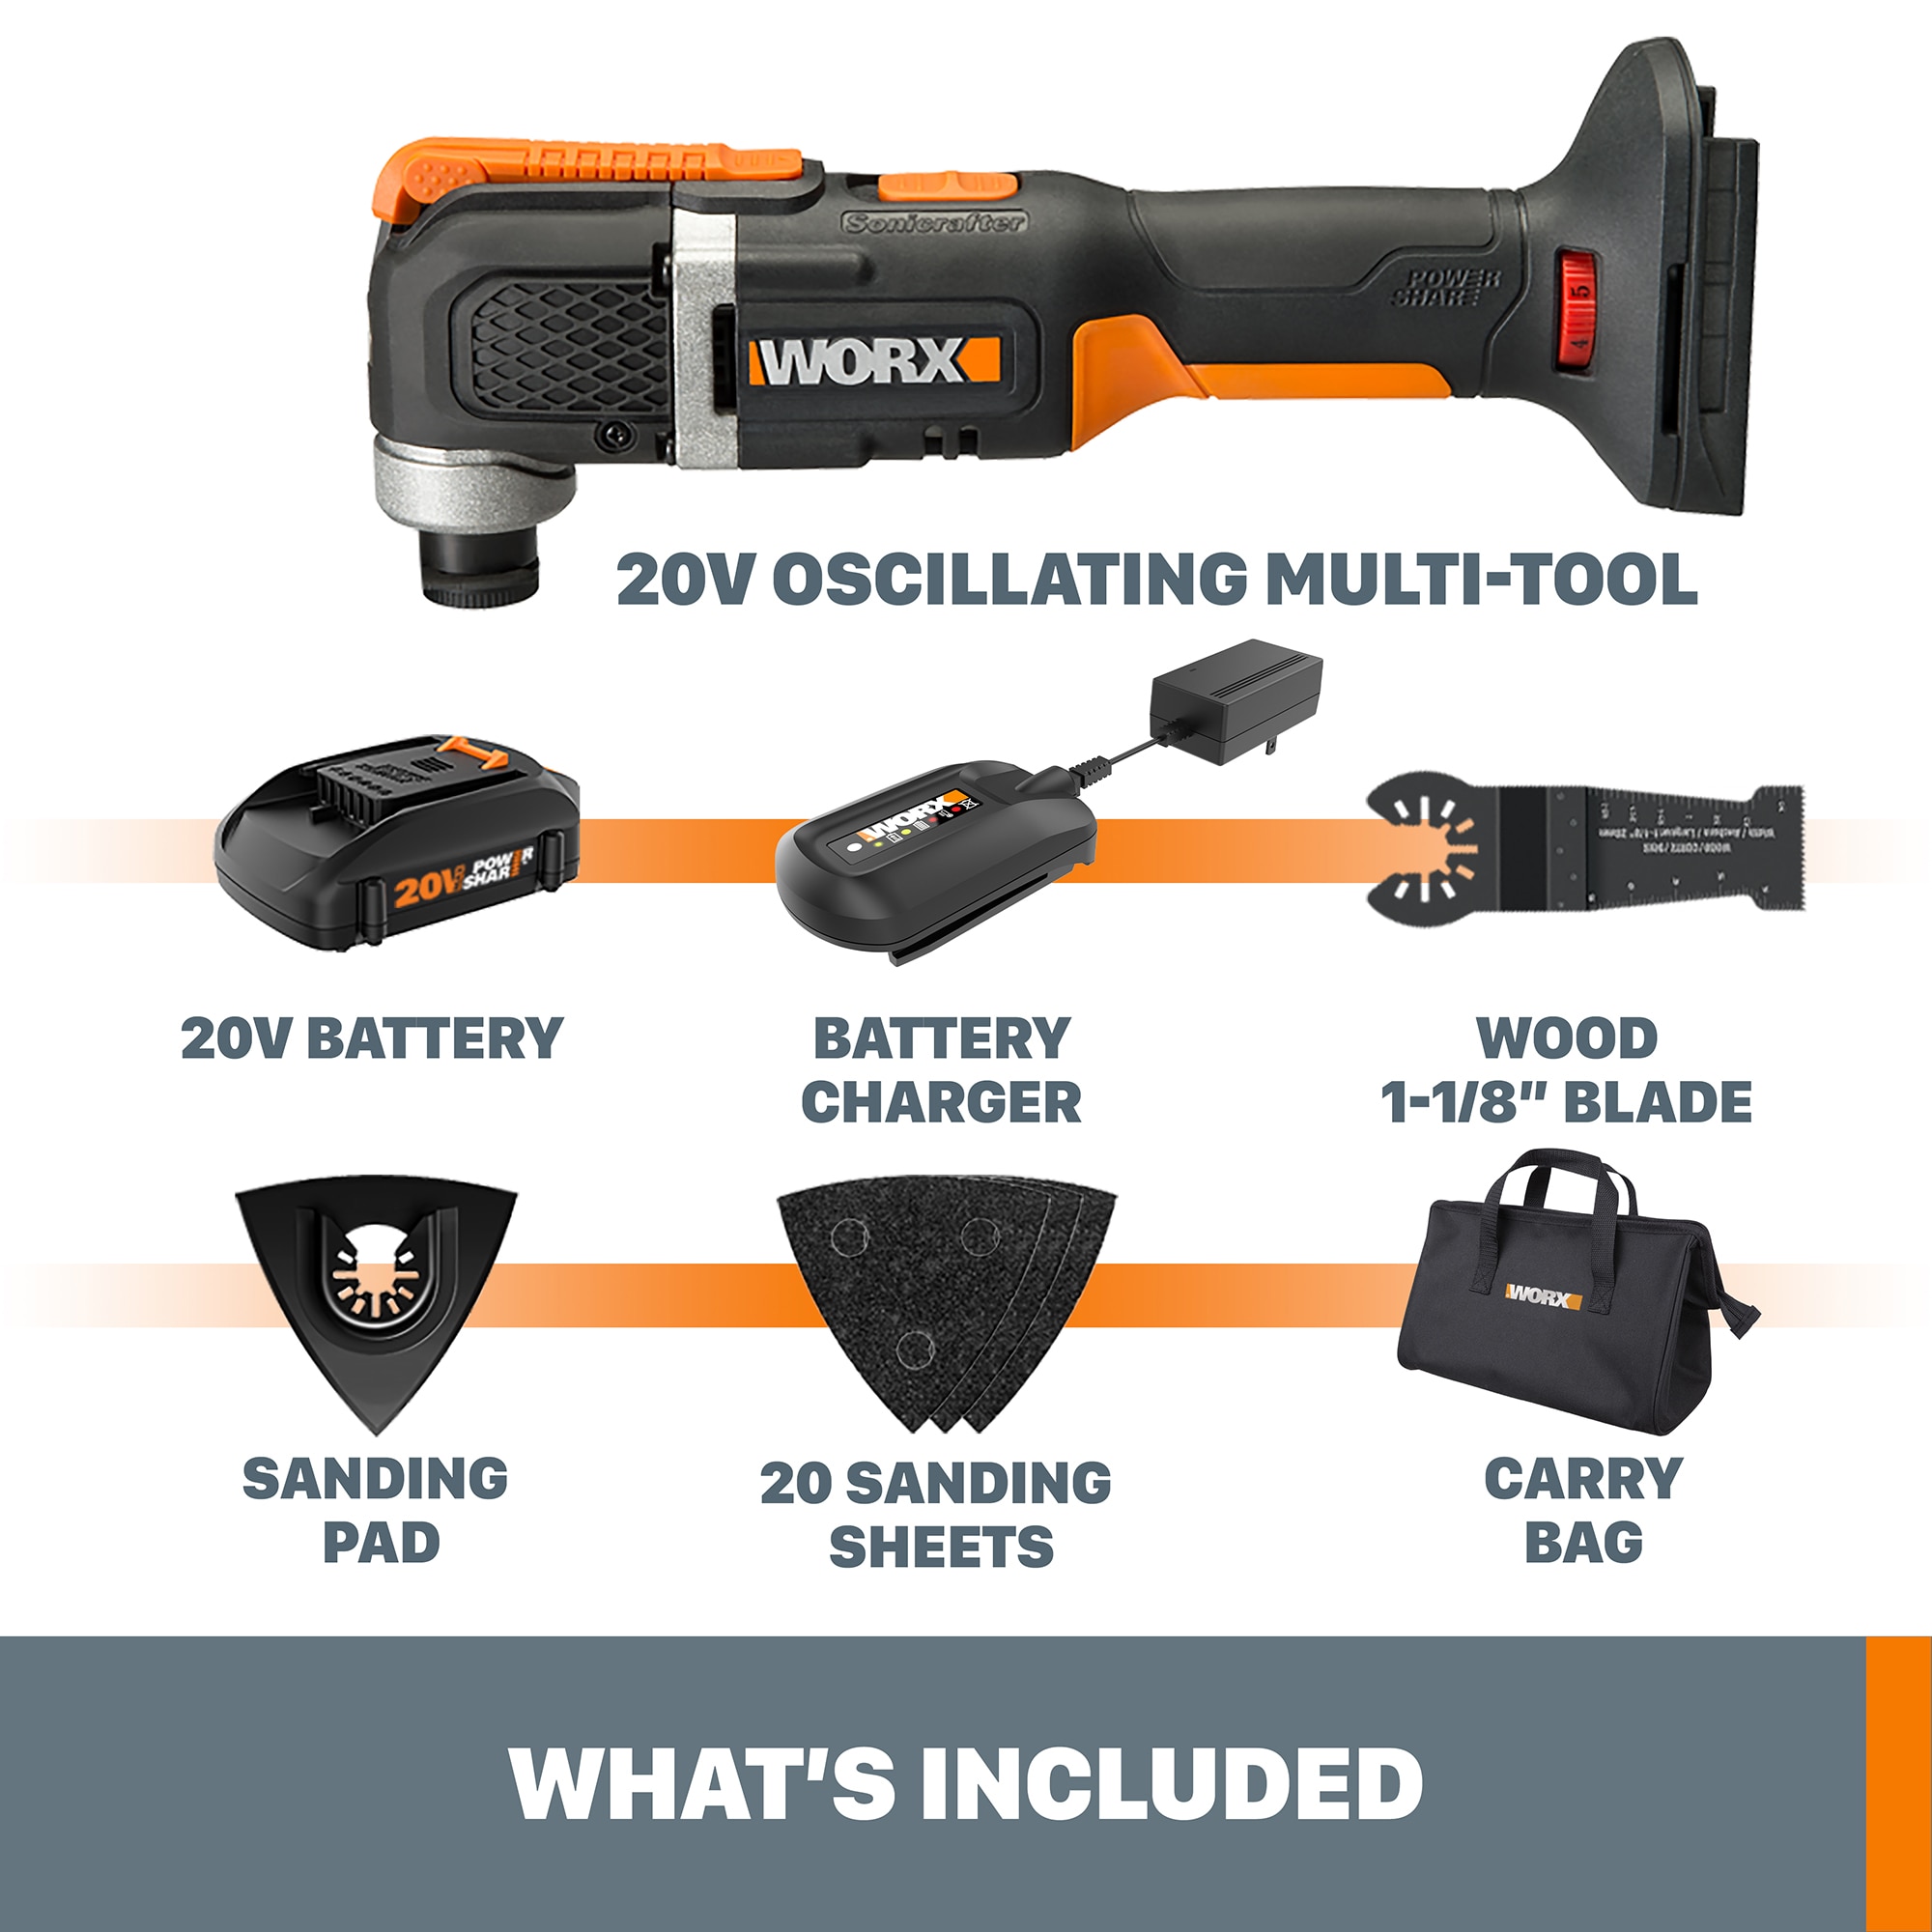 WORX POWER SHARE 25-Piece-Amp 20-volt Max Variable Speed Oscillating Multi- Tool Kit with Soft Case (1-Battery Included) at